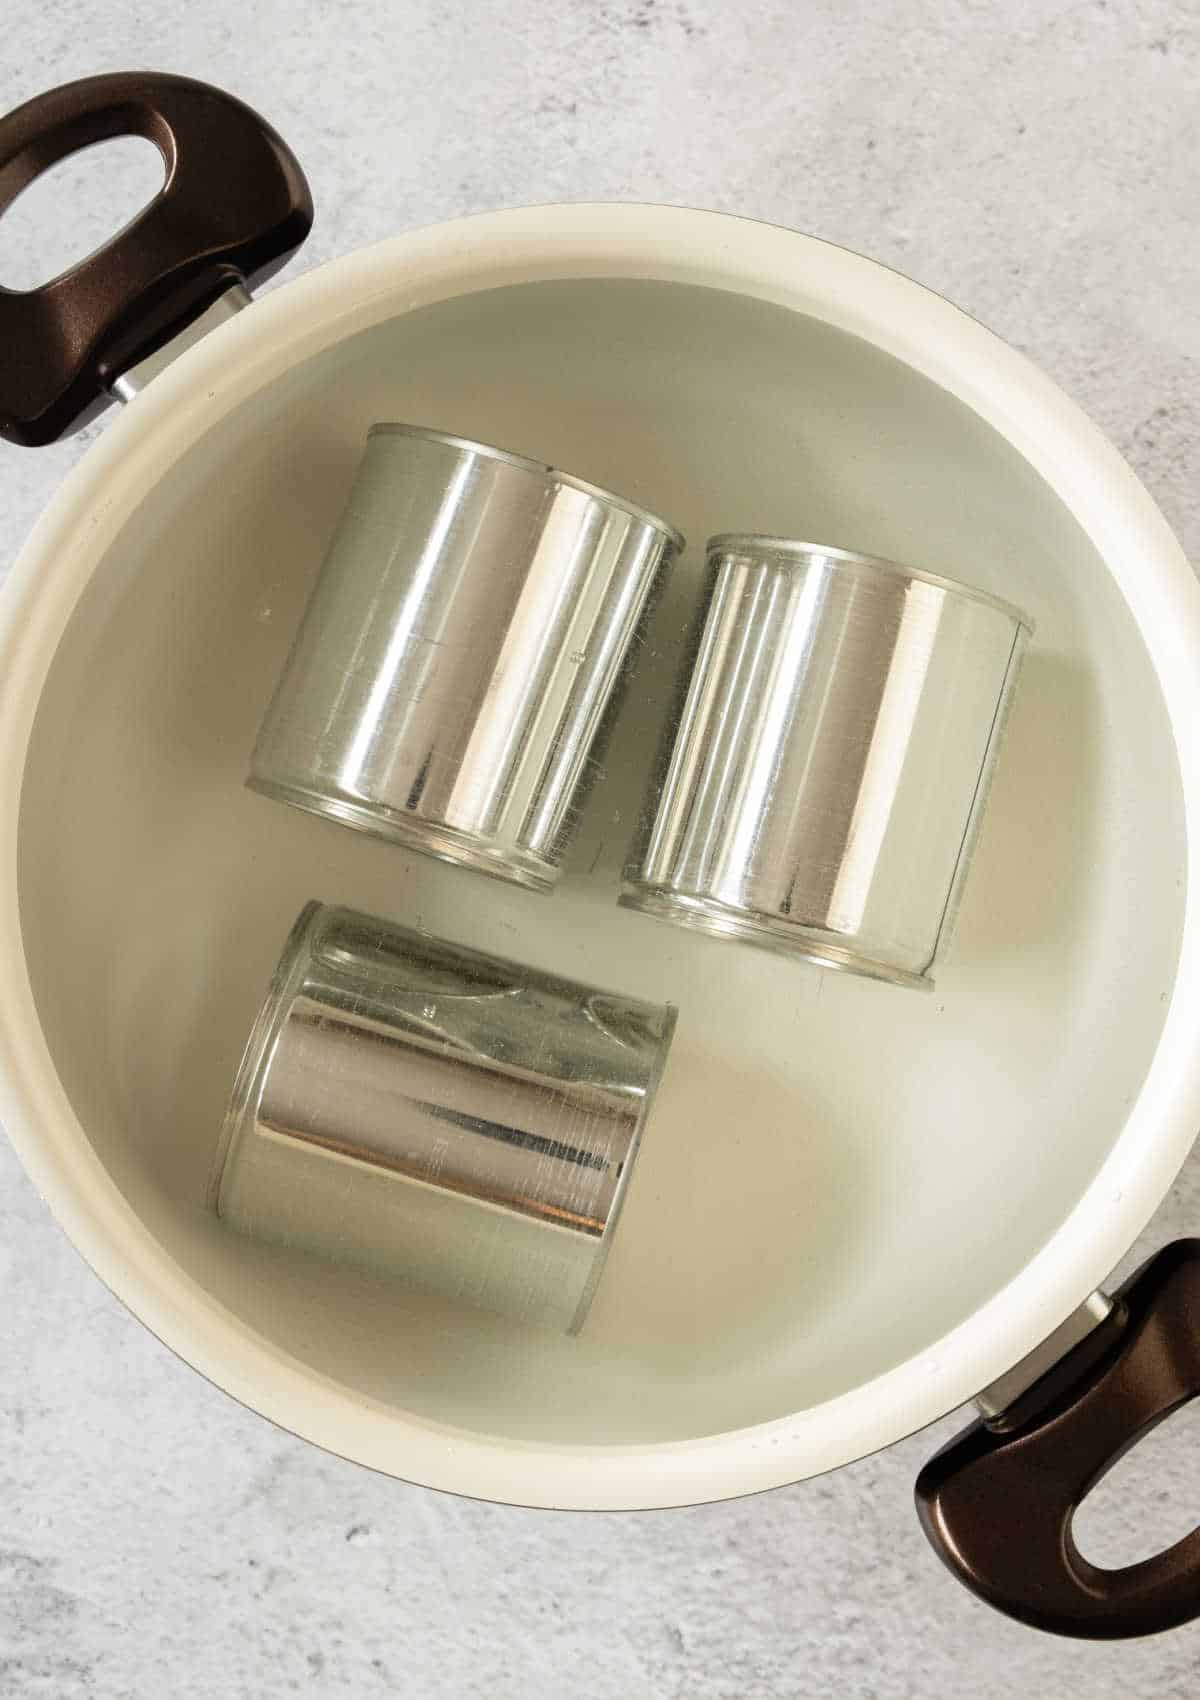 Large white pot with water and three metal cans. Light gray surface.